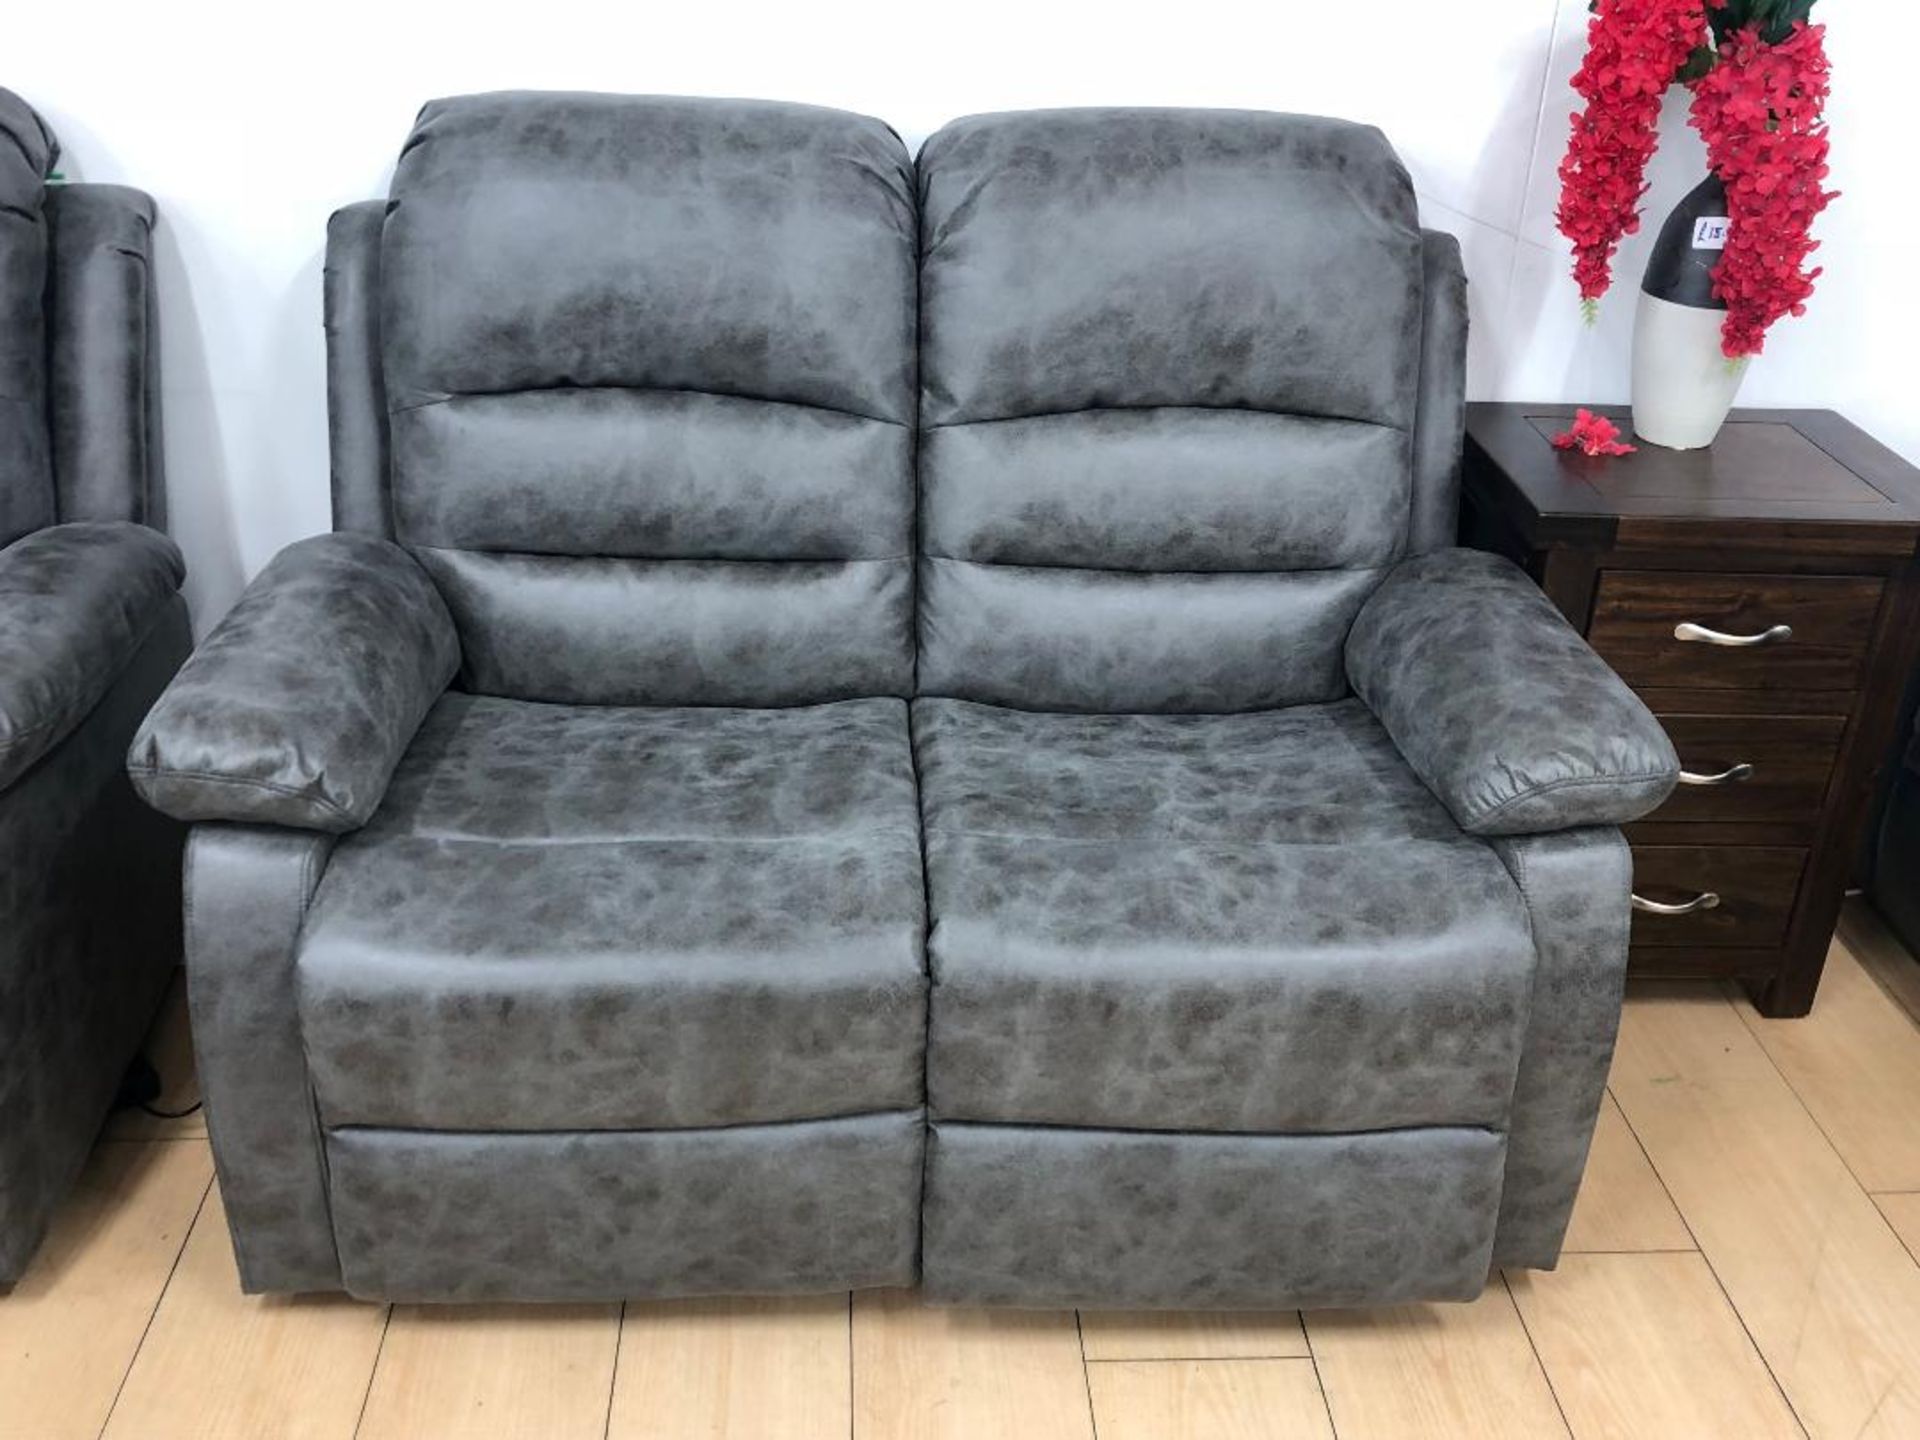 Brand new boxed Cartier 3 seater plus 2 seater plus arm chair in grey plush velvet suede fabric - Image 3 of 5